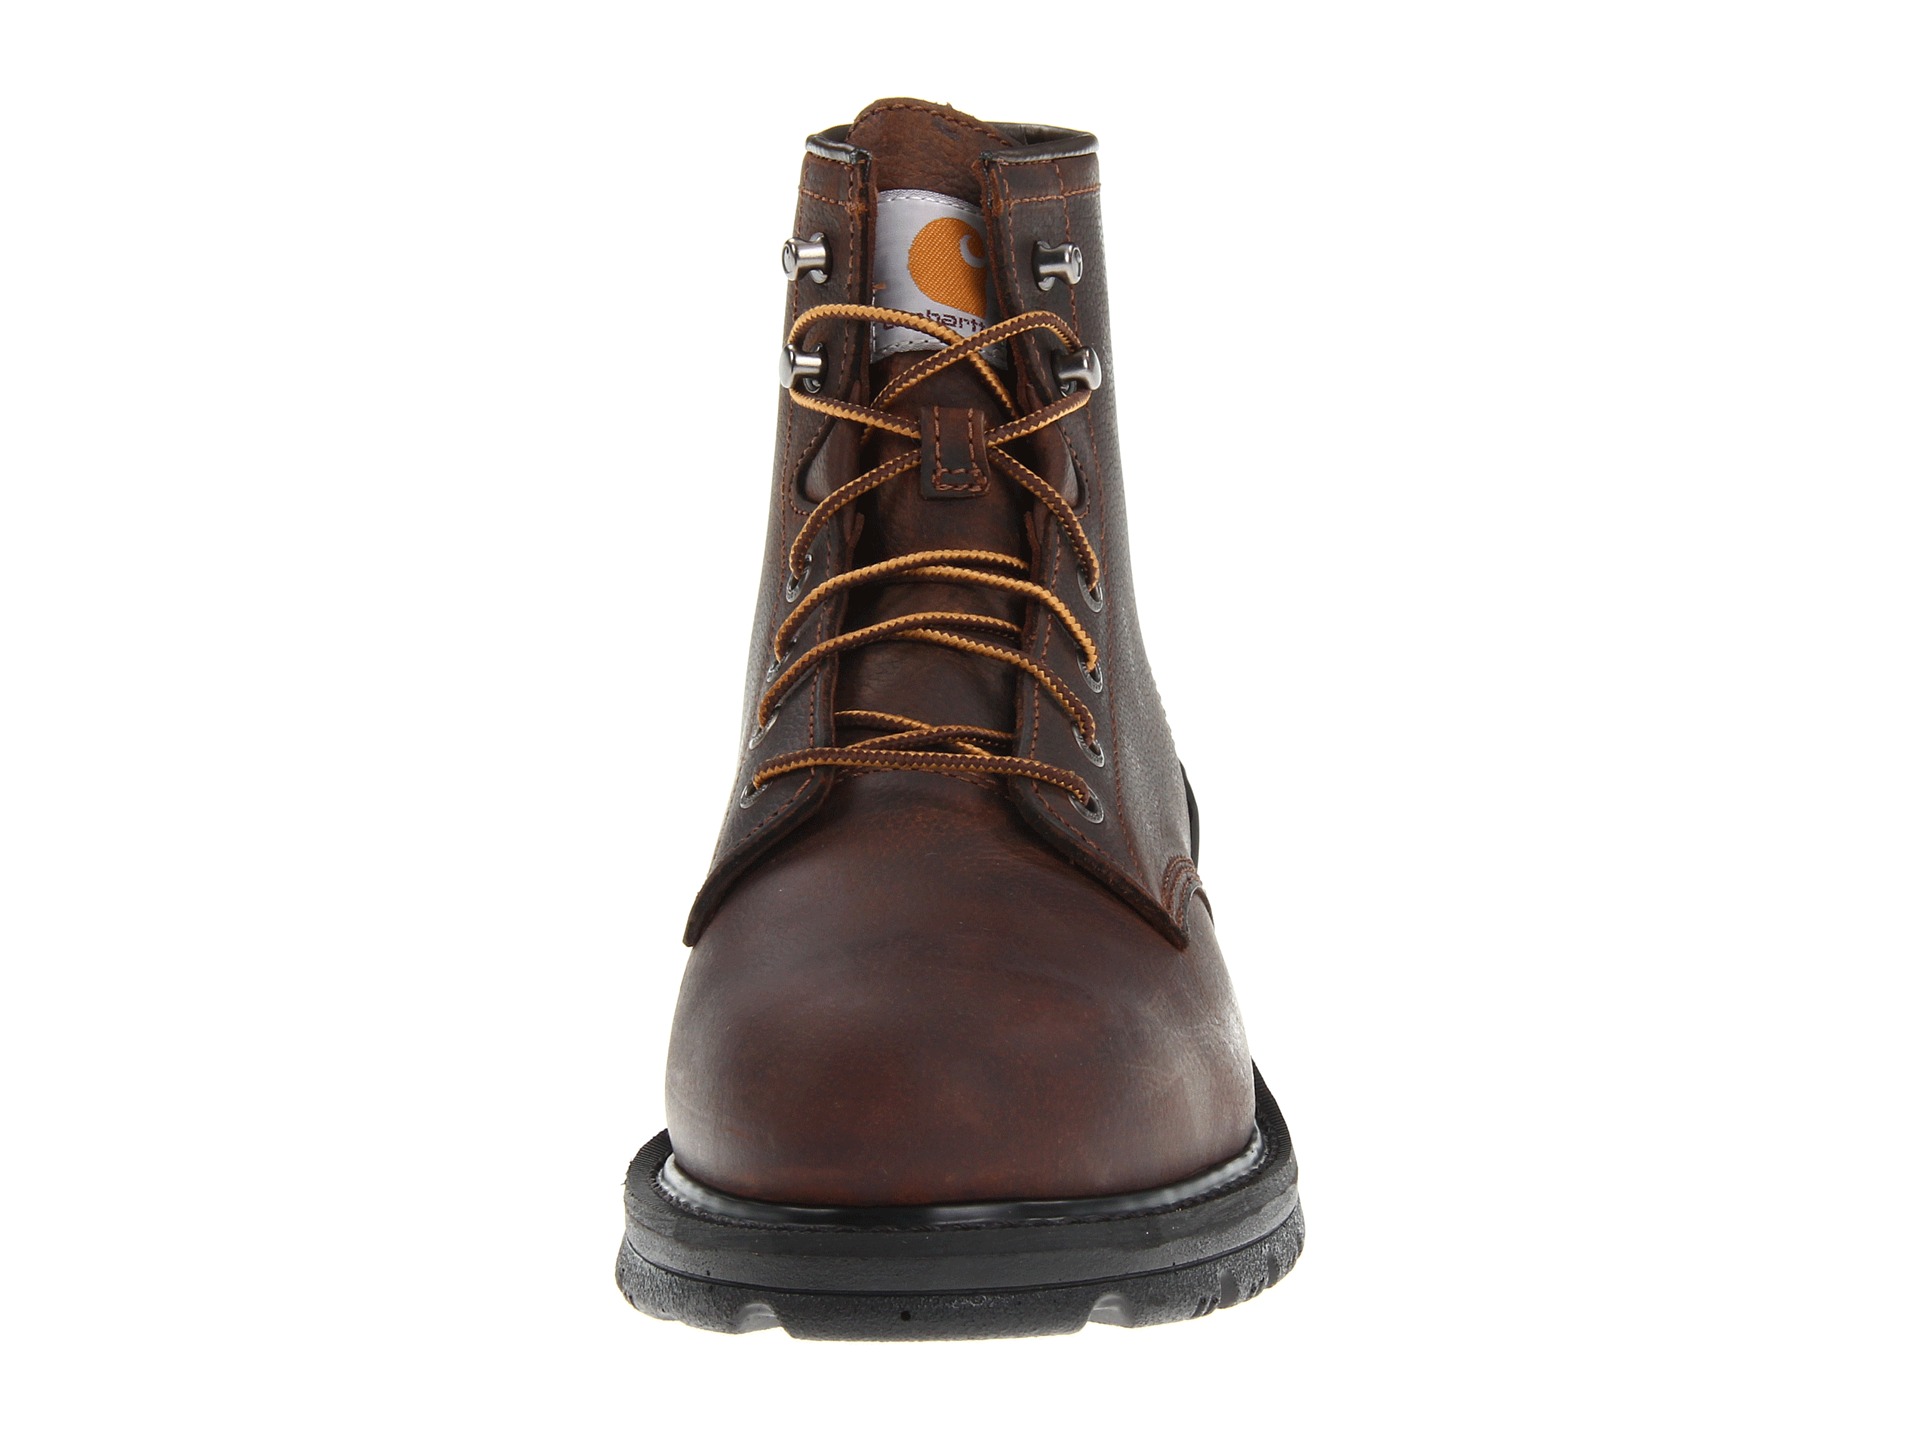 Carhartt 6 Unlined Work Boot | Shipped Free at Zappos